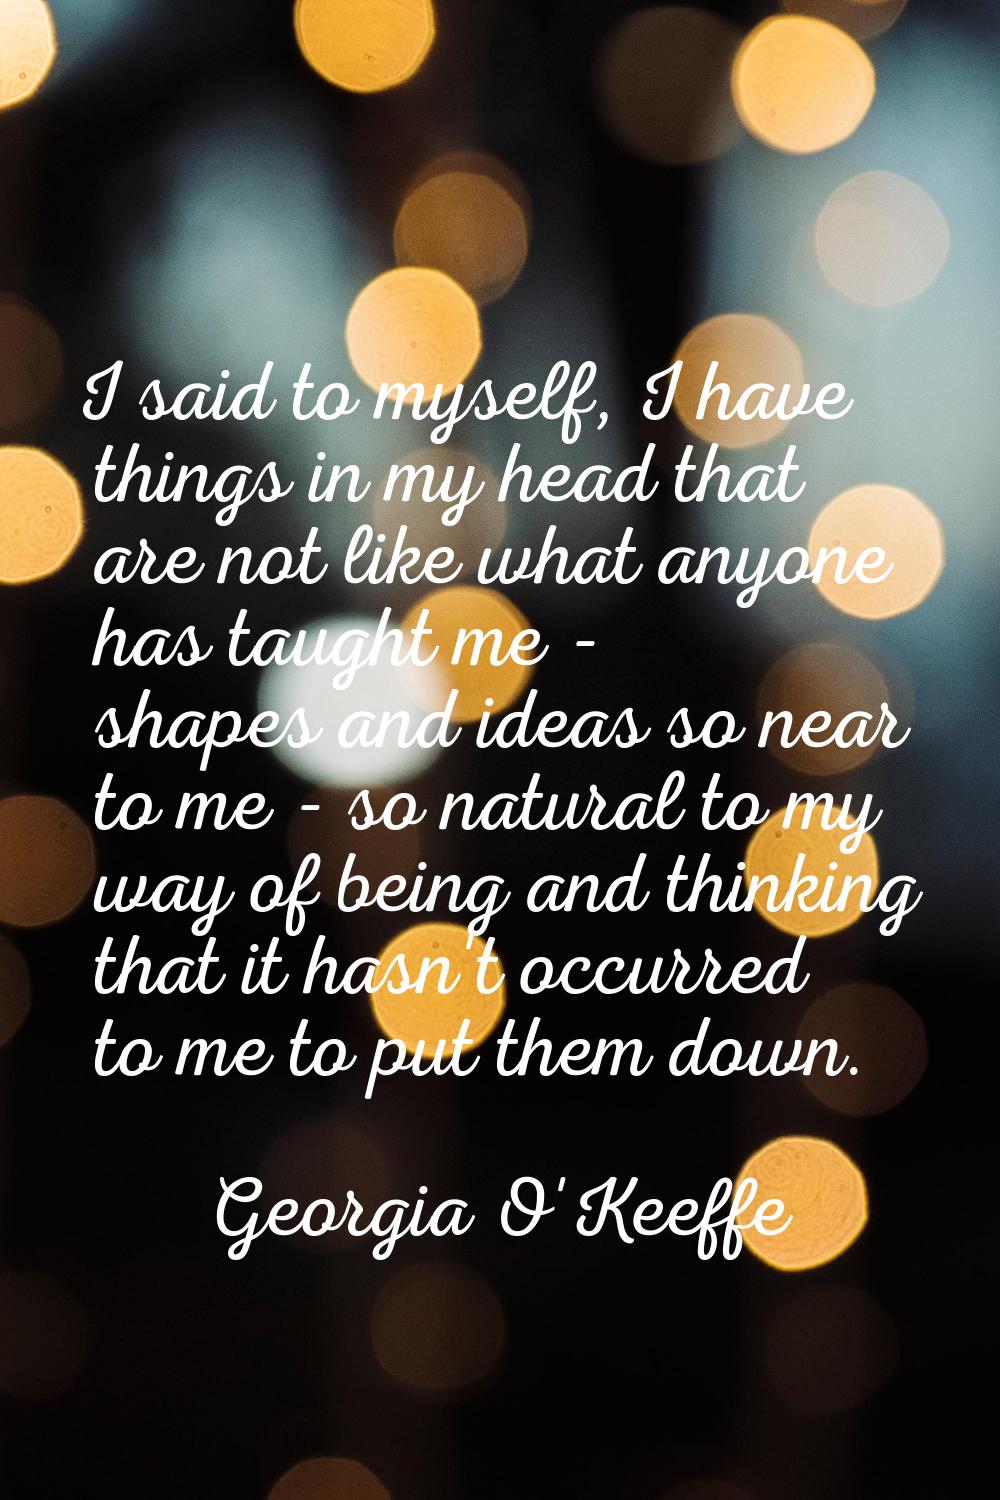 I said to myself, I have things in my head that are not like what anyone has taught me - shapes and